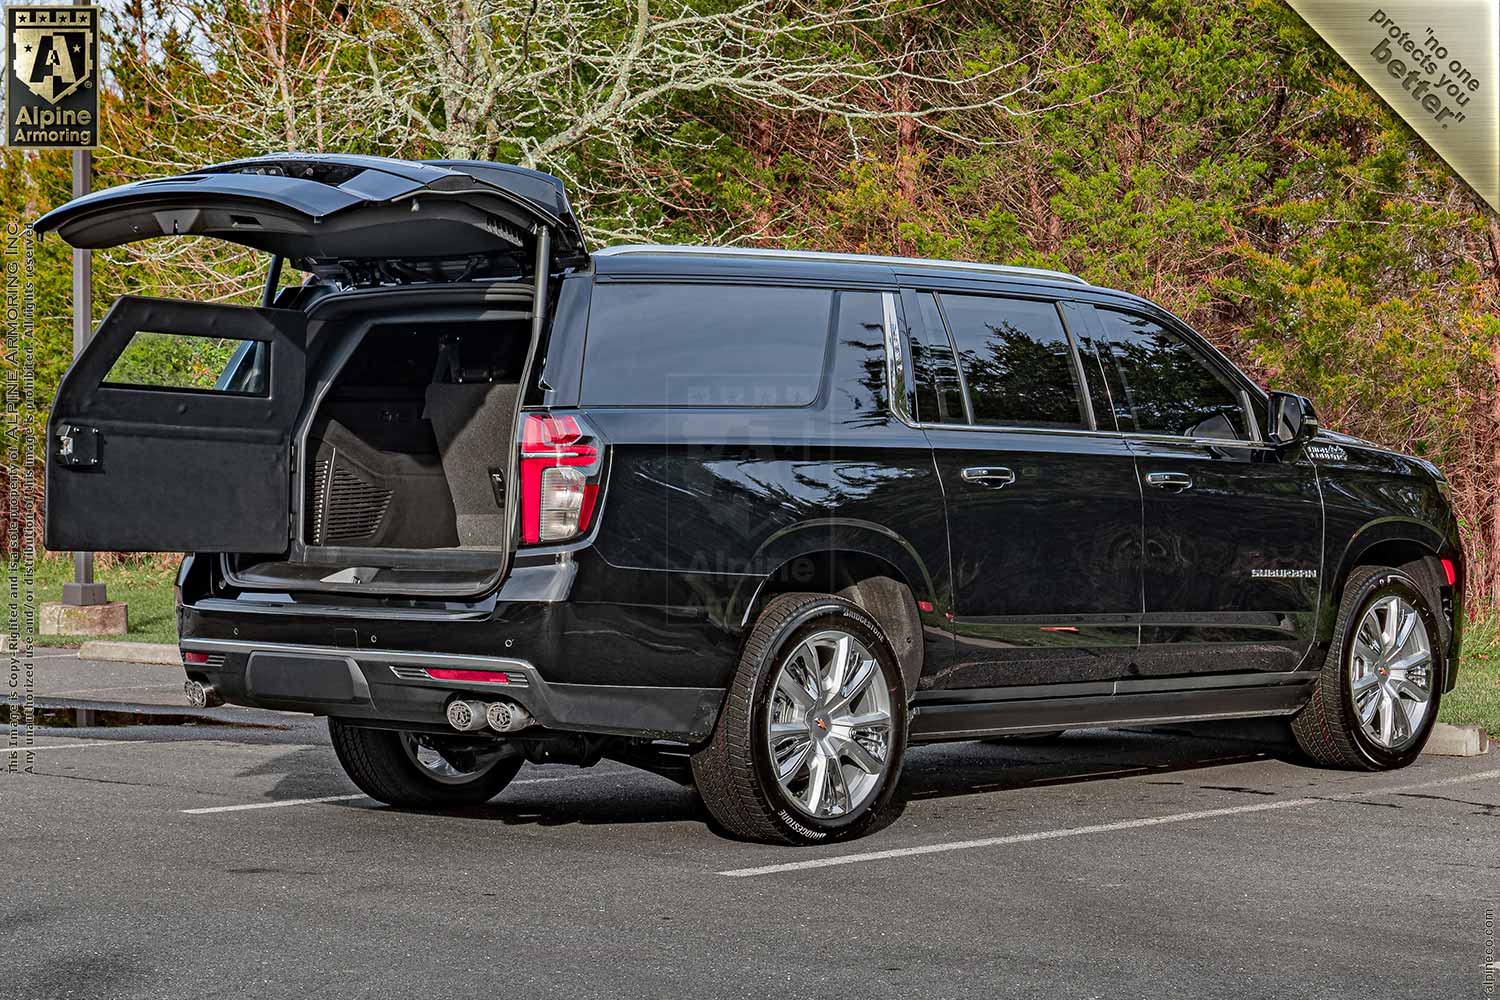 New Inventory armored Chevrolet Suburban High Country Exterior & Interior Images VIN:6562